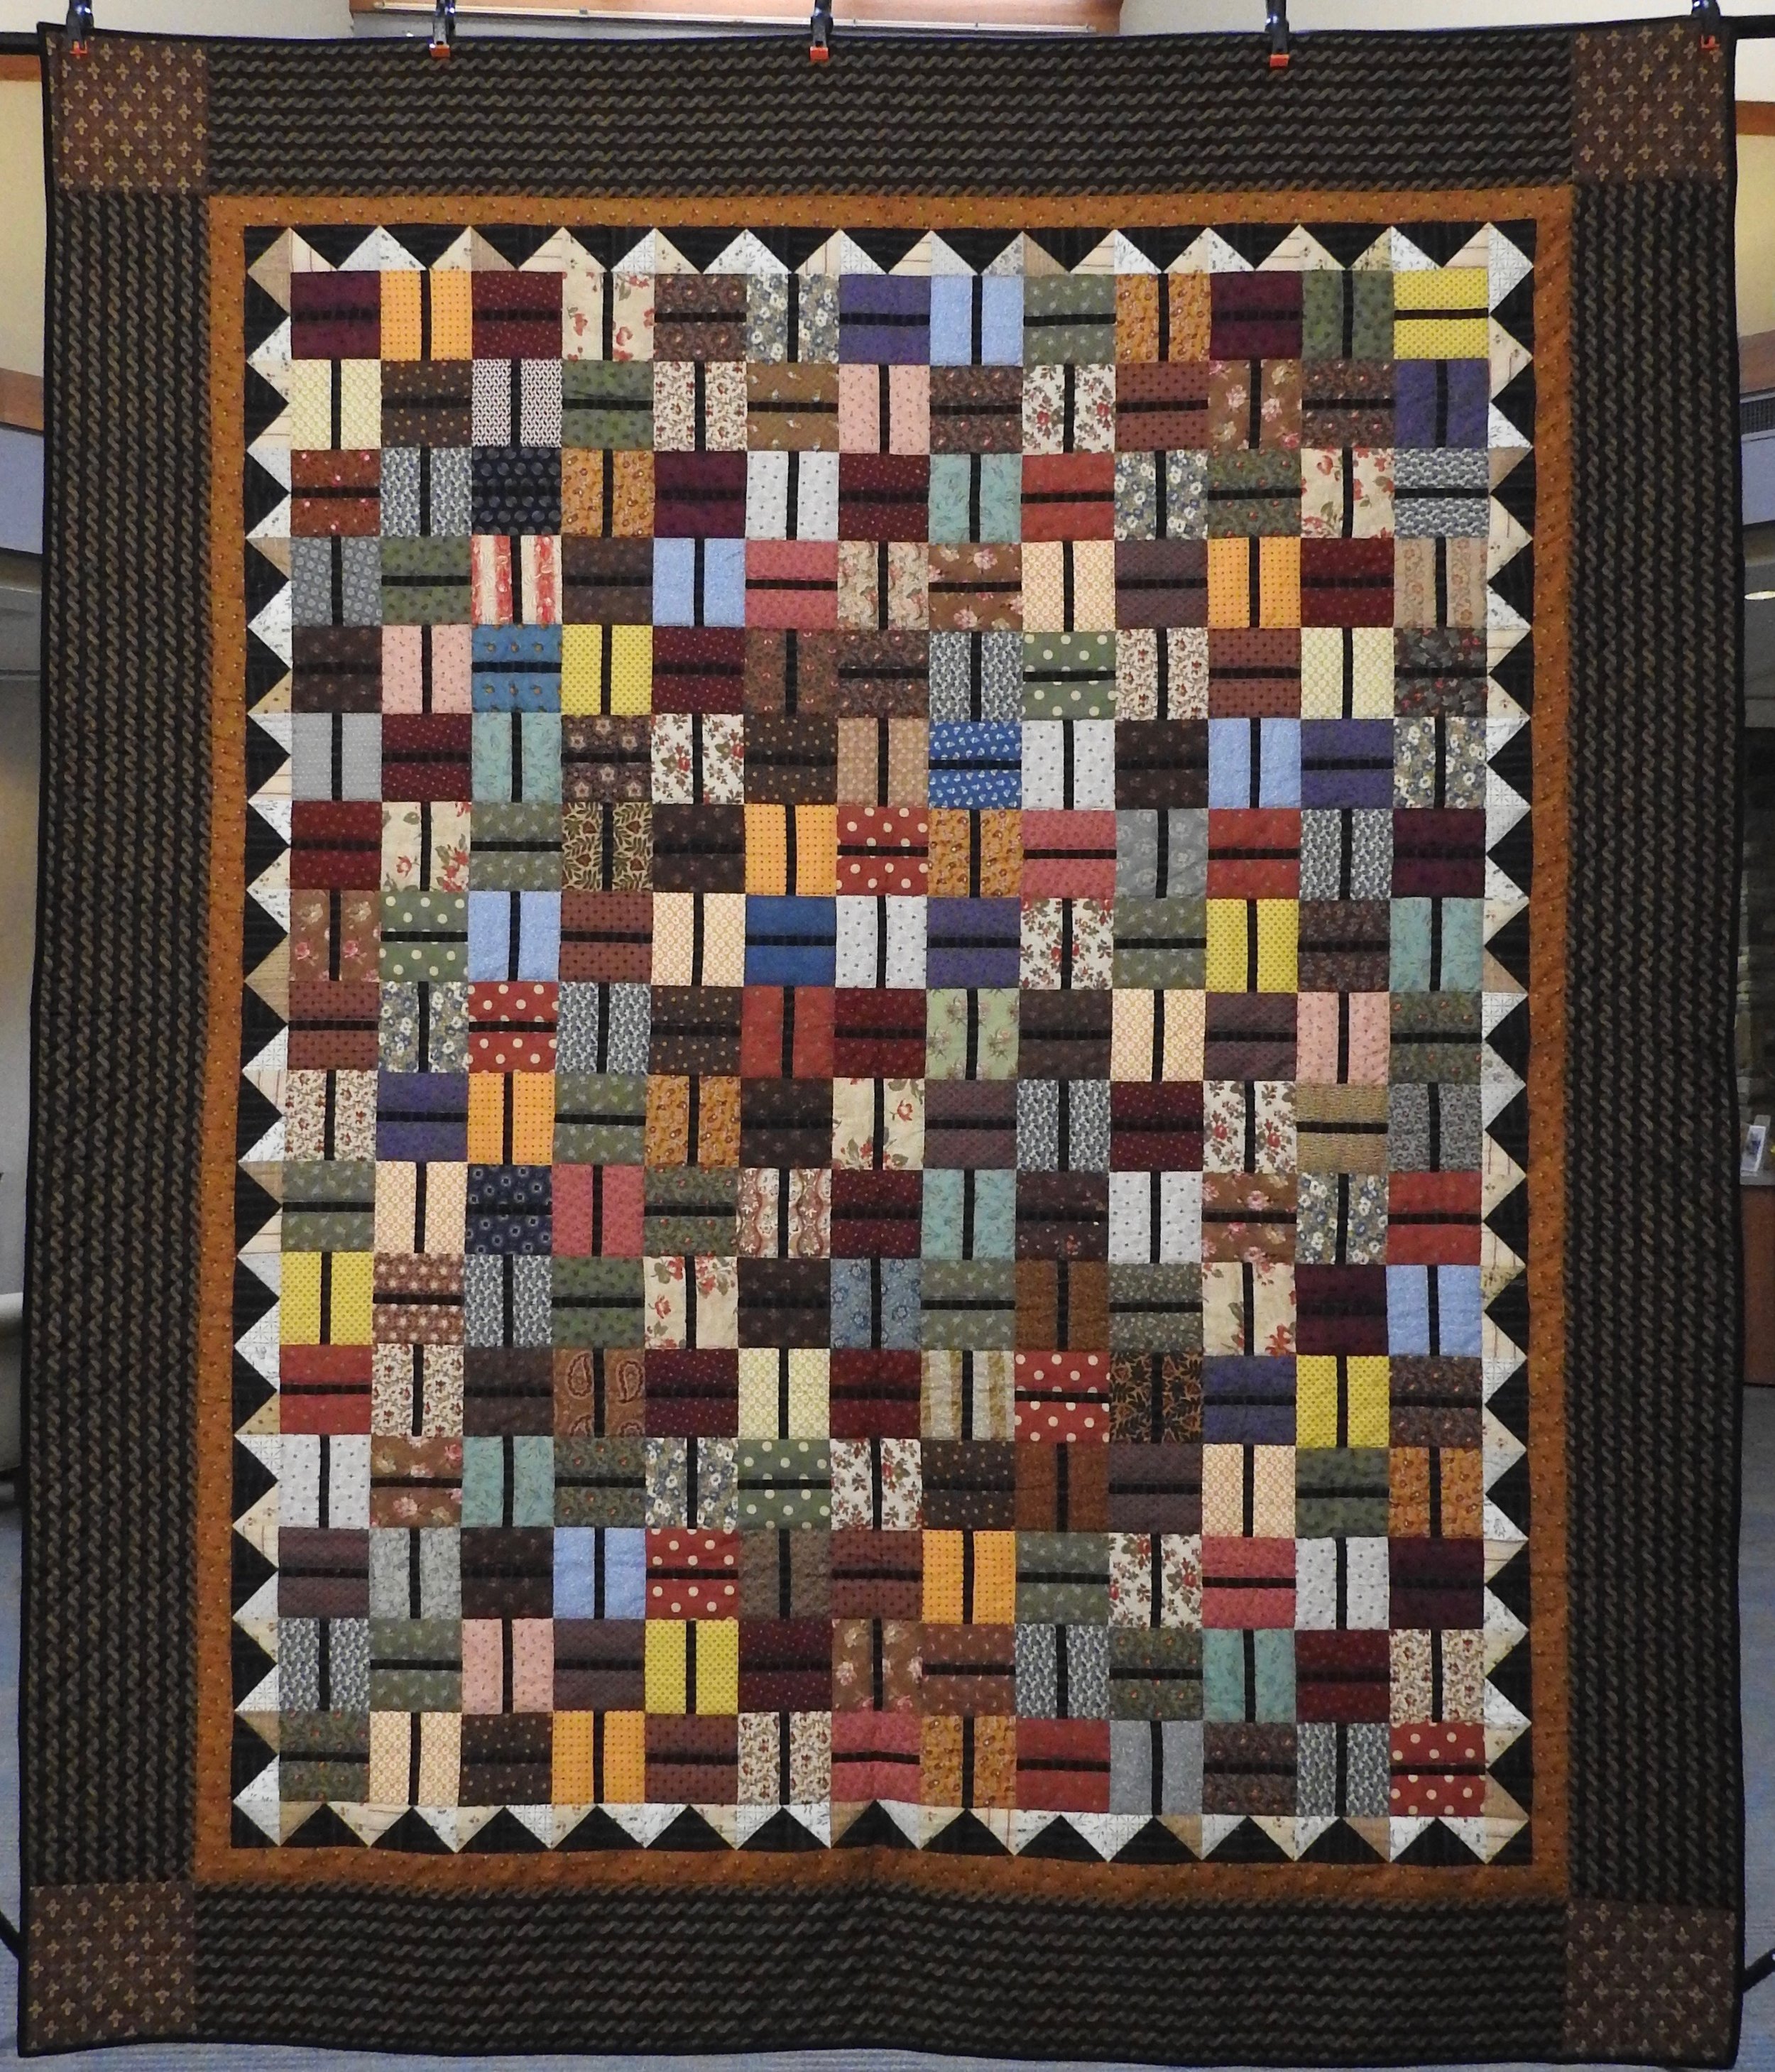 Autumn Fades into Winter, Pieced, Hand Quilted by Evergreen Place Quilters, donated anonymously, 82 x 98”